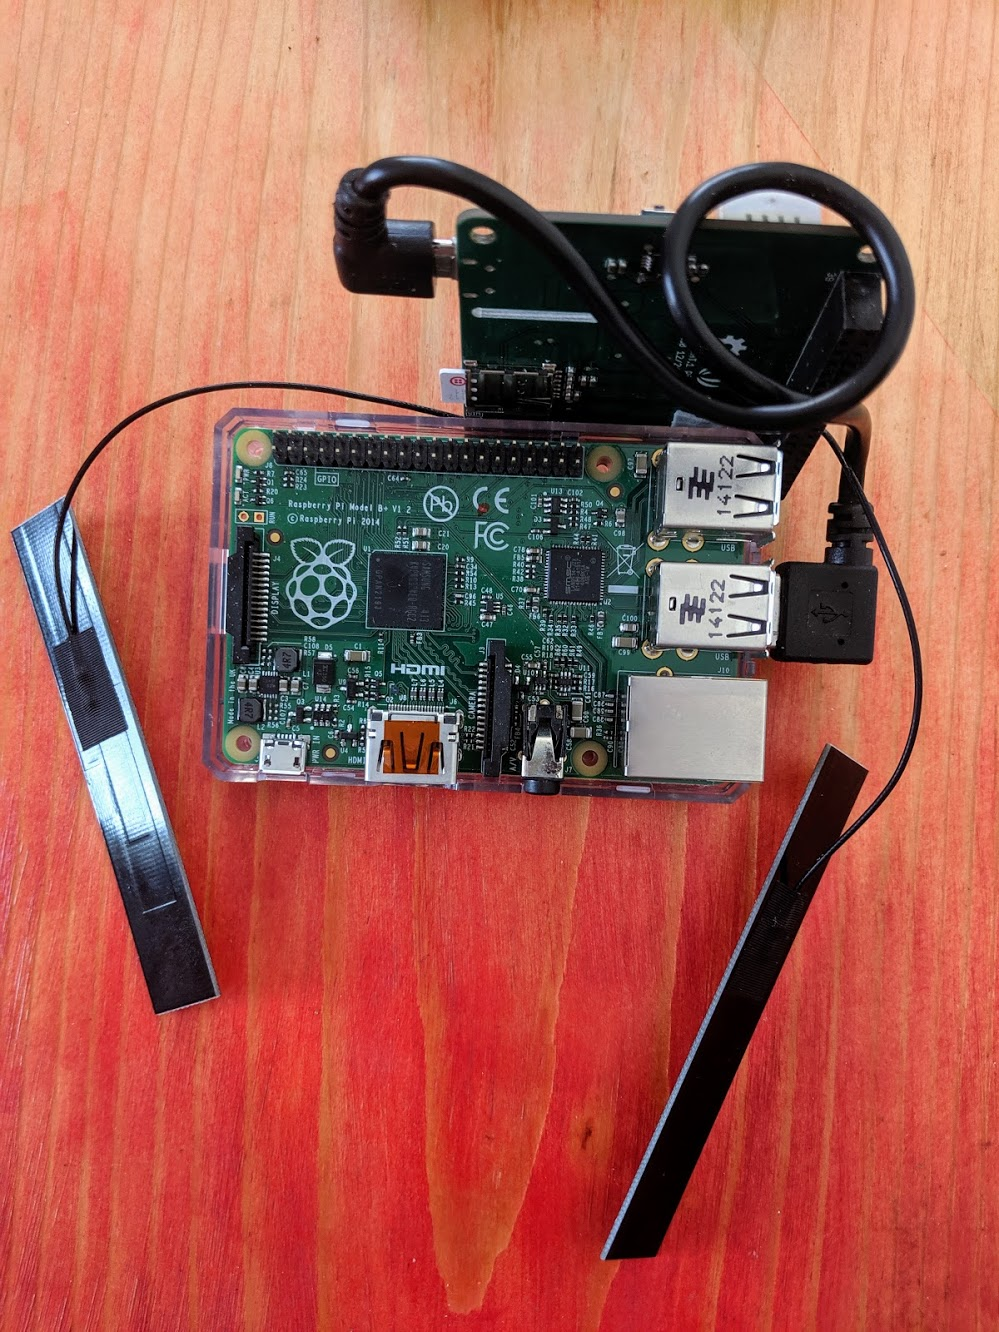 A Raspberry Pi sits on a table. A LTE Cat 1 Pi HAT is attached via the USB-A to micro USD ports. The hat sits next to the pi, but not on top of it, and the HAT has antennas attached.